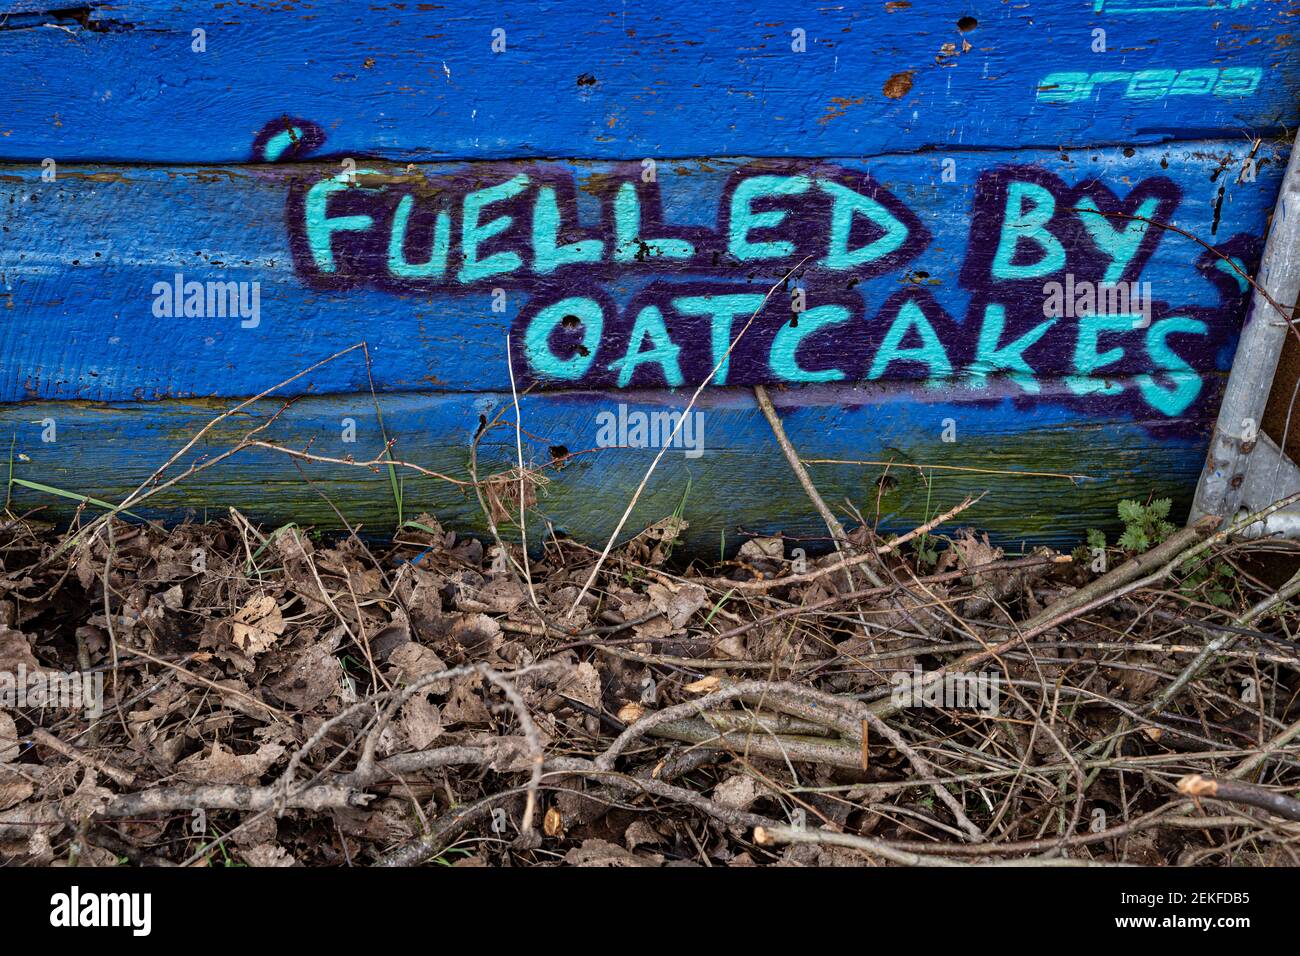 Graffiti on a fence by the Trent and Mersey canal, Middleport, Stoke-on-Trent, UK saying 'Fuelled by oatcakes' a local food of the area. Stock Photo